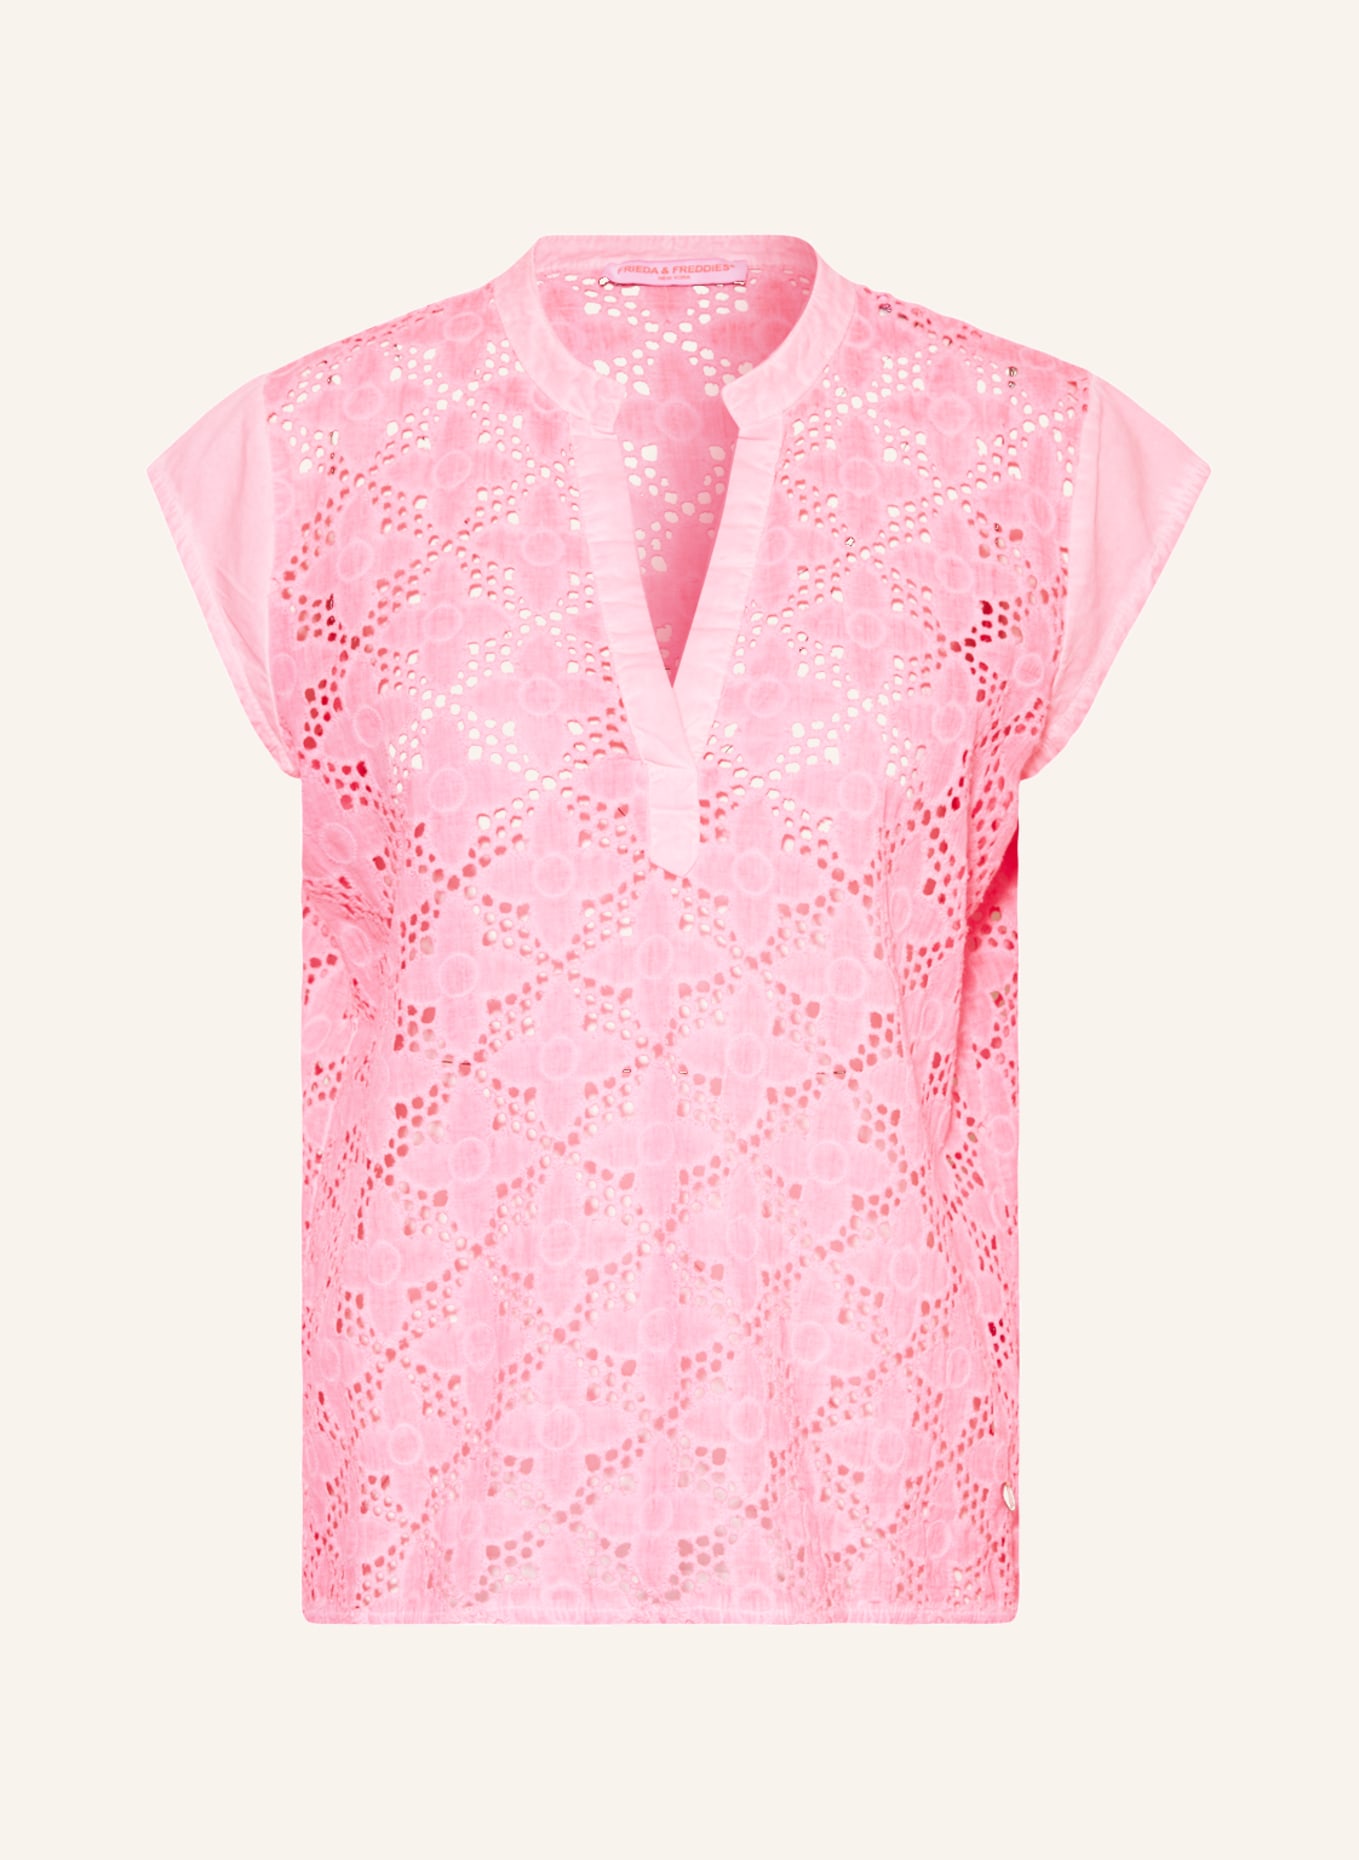 FRIEDA & FREDDIES Shirt blouse made of lace, Color: NEON PINK (Image 1)